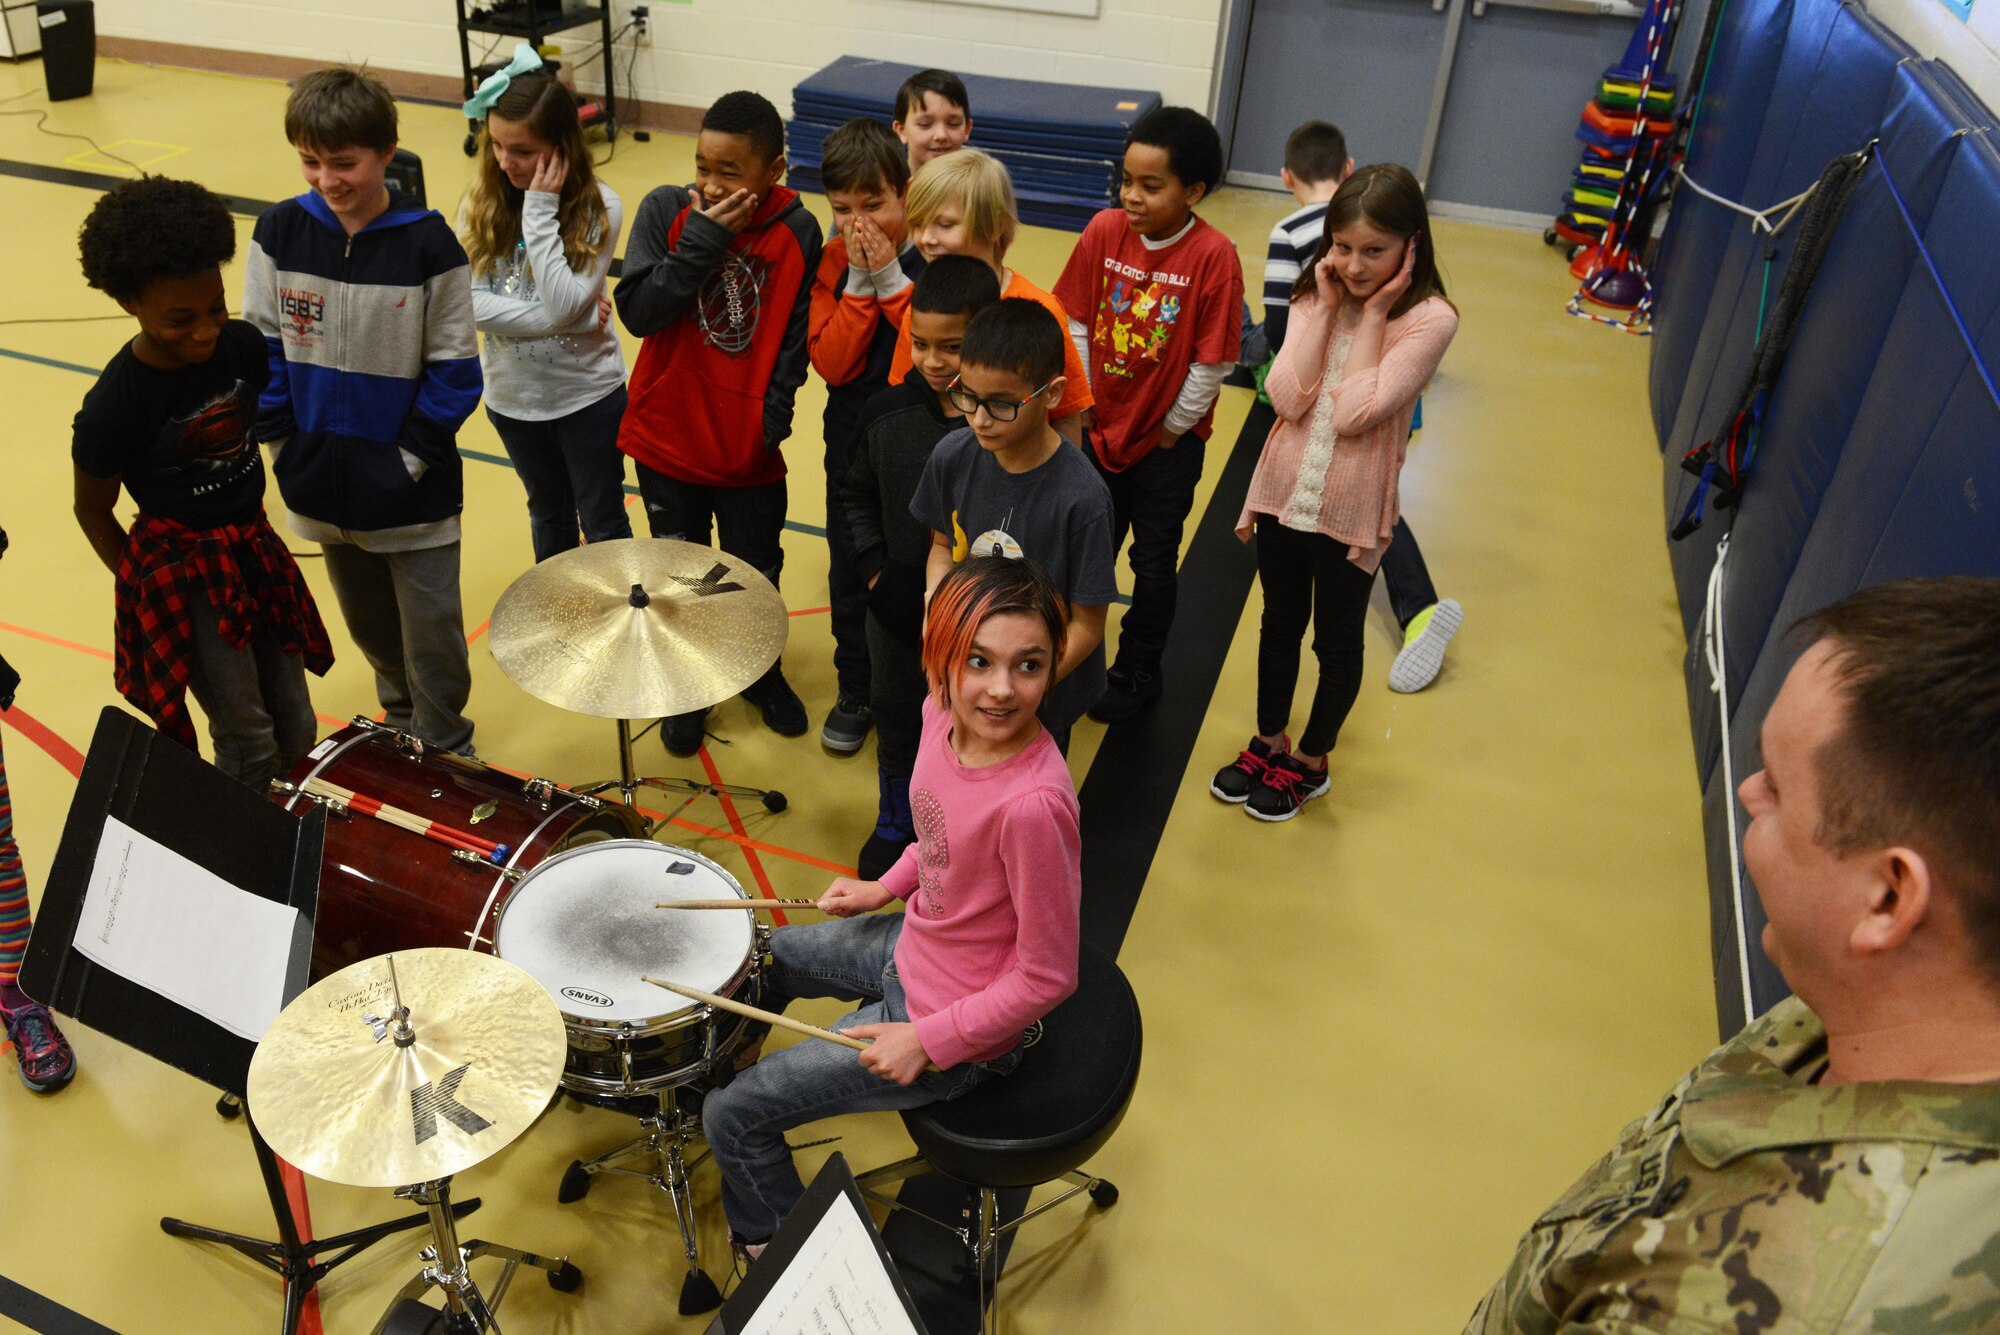 Army Sgt. Kevin Drysdale, Percussion playerforthe 9th Army Band and group 'Frigid Brass,' teaches 4th and 5th graders how to play the drums at Orion Elementary School, Joint Base Elmendorf-Richardson, Alaska, Feb. 21, 2017. ‘Frigid Brass’ performed many different genres of music and taught the children the first steps in playing each instrument to spark an interest in the musical arts. 